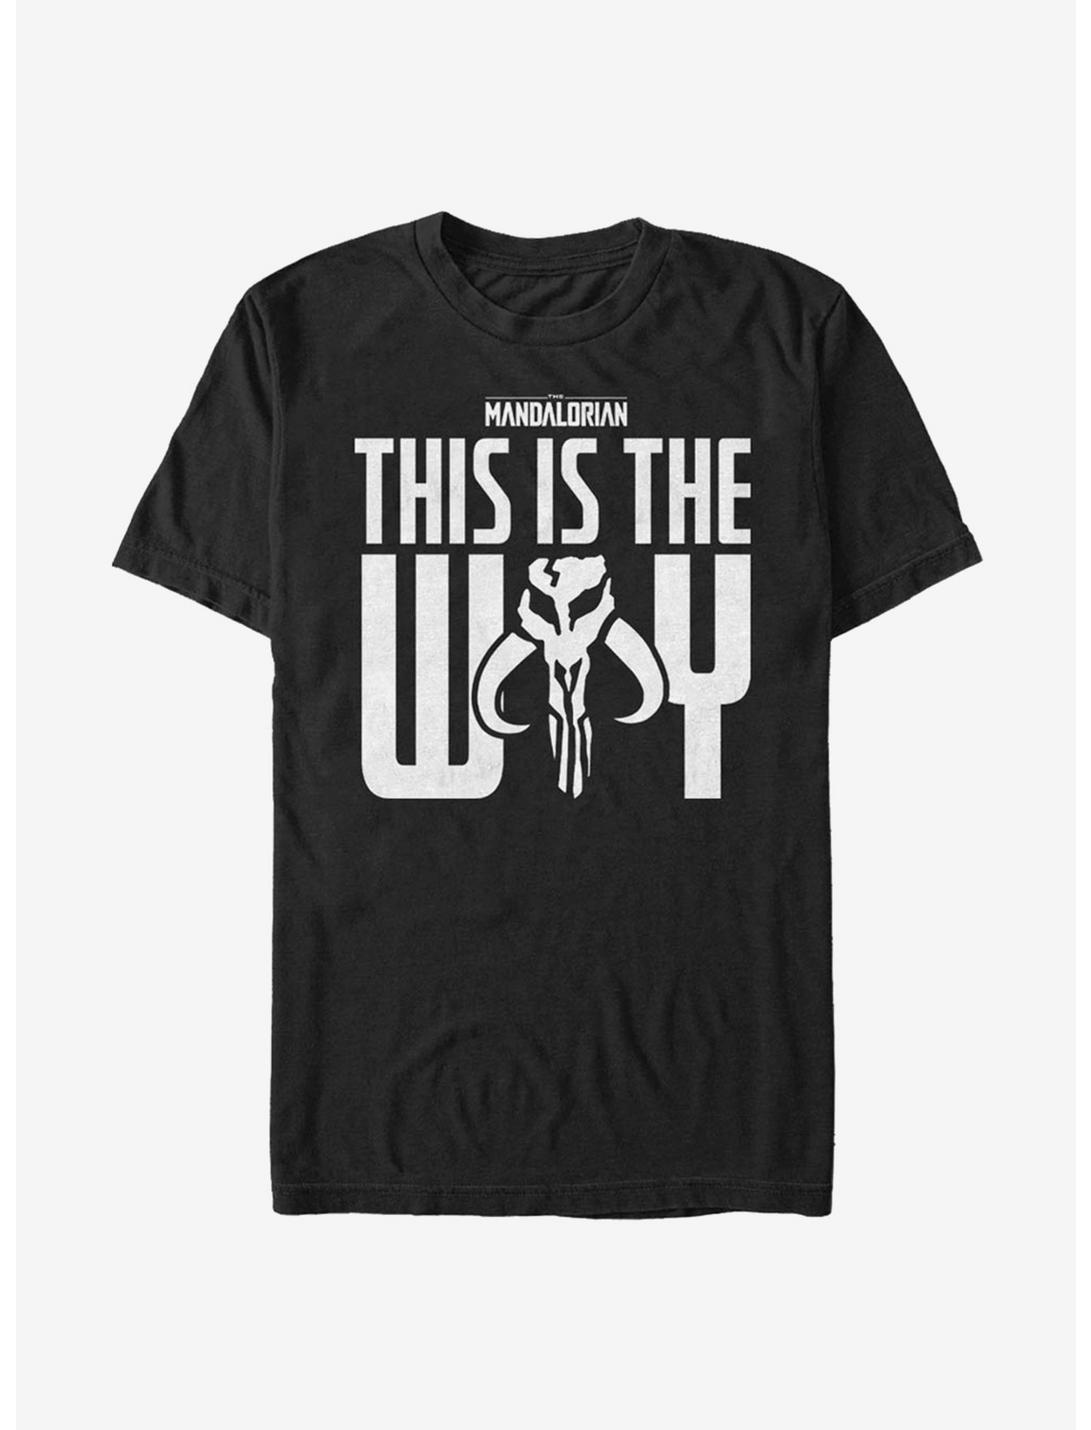 Star Wars The Mandalorian This Is The Way Bold Iron Heart T-Shirt, BLACK, hi-res